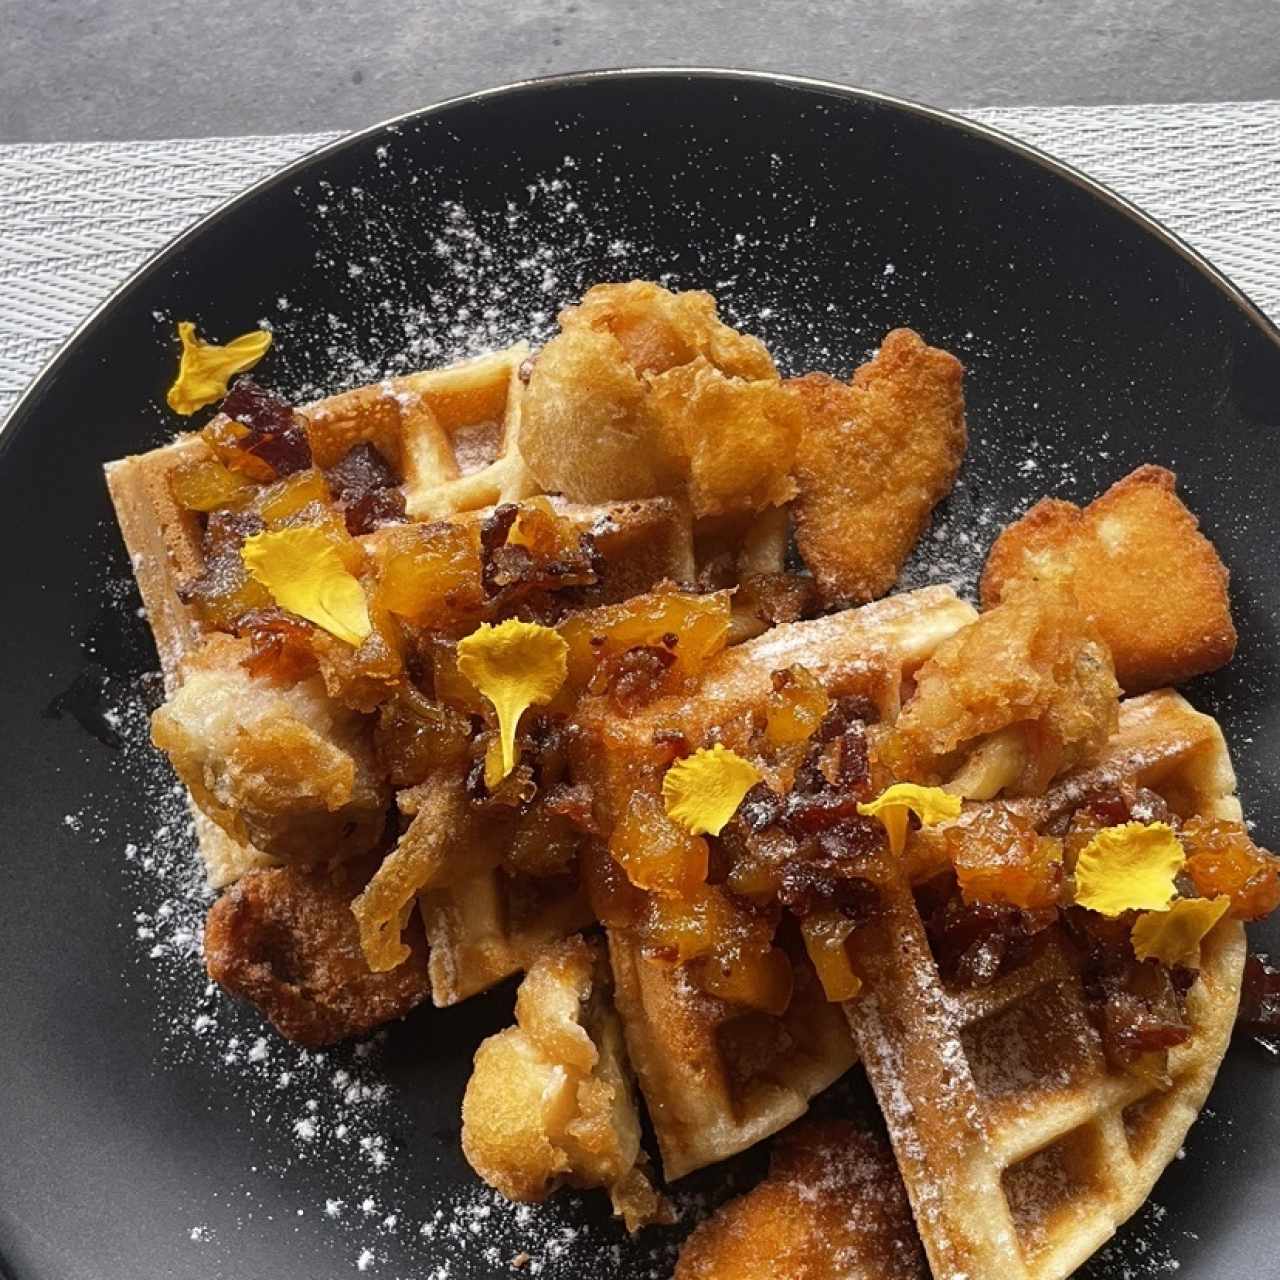 Chicken and waffles